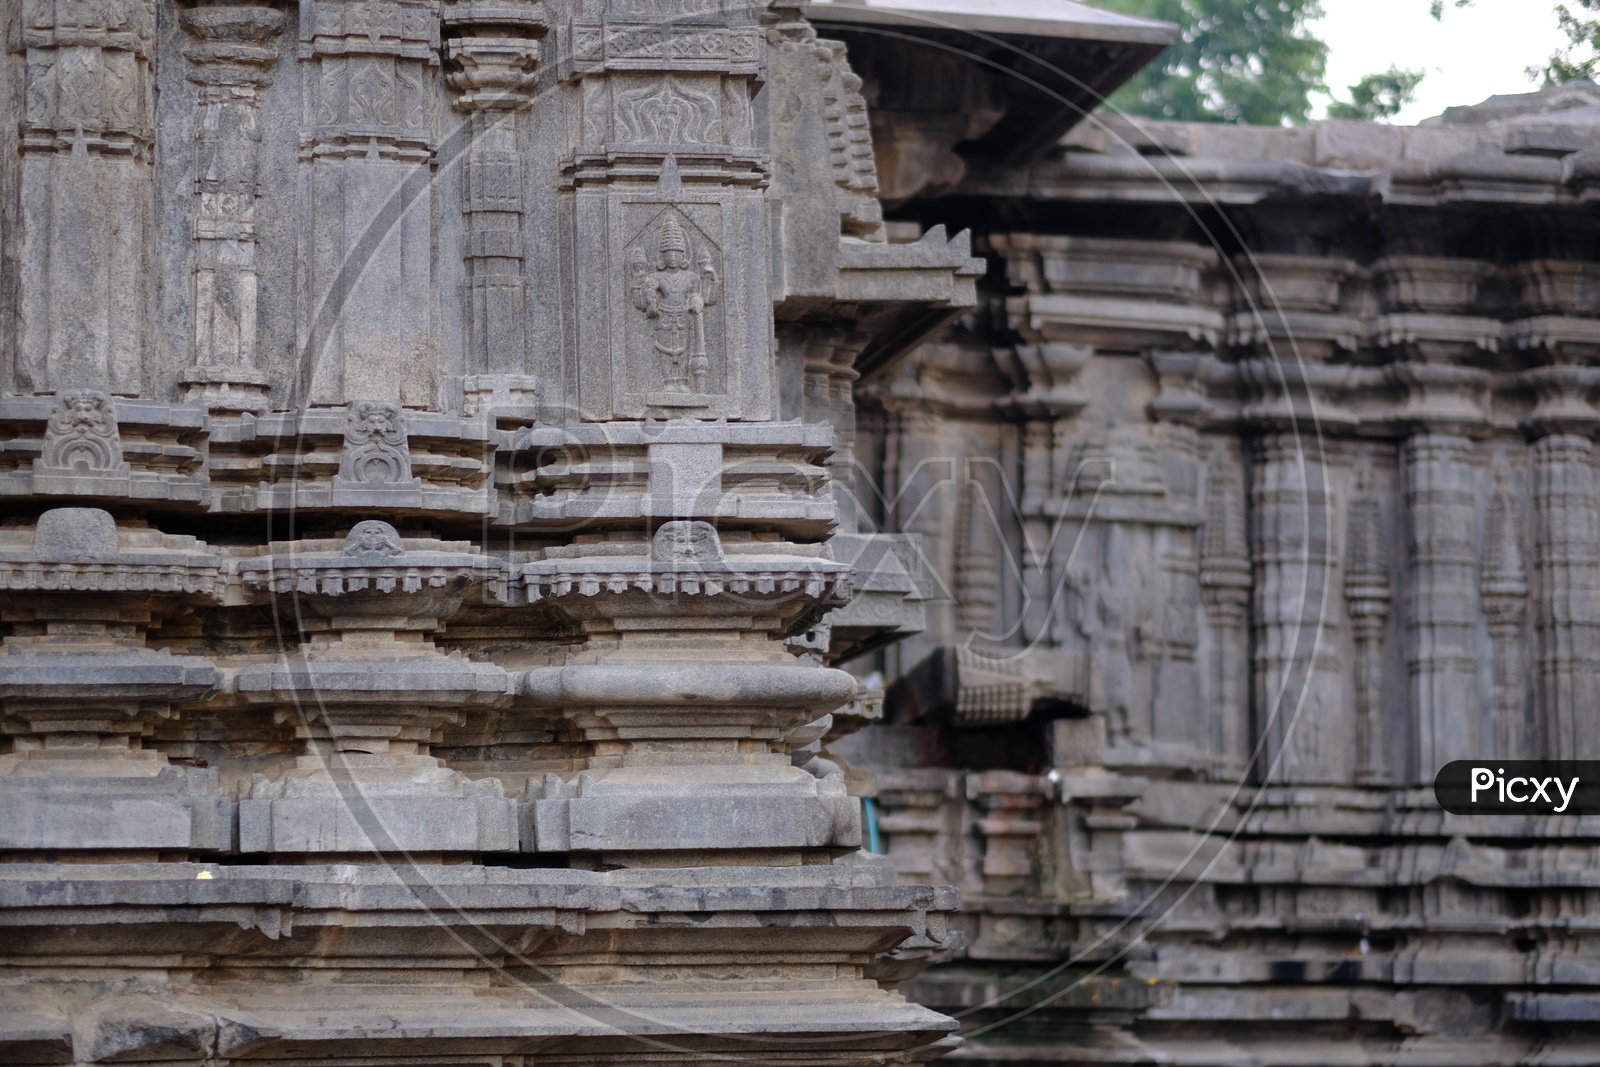 Architecture Of  Stone Carvings On The Walls Of Ancient Hindu Temples